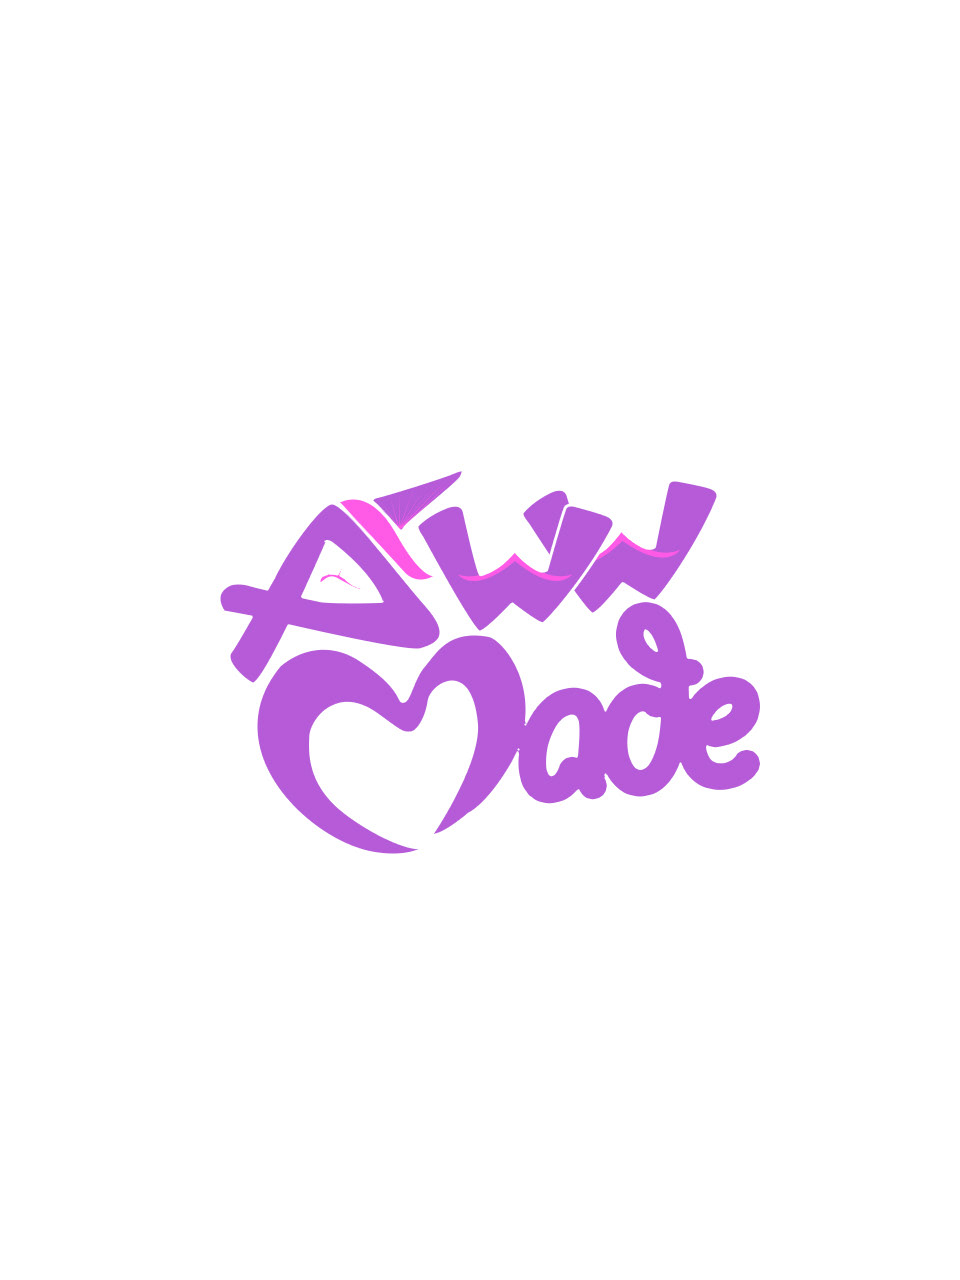 aww made logo cuteness pink purle graphics Hobby vector photoshop